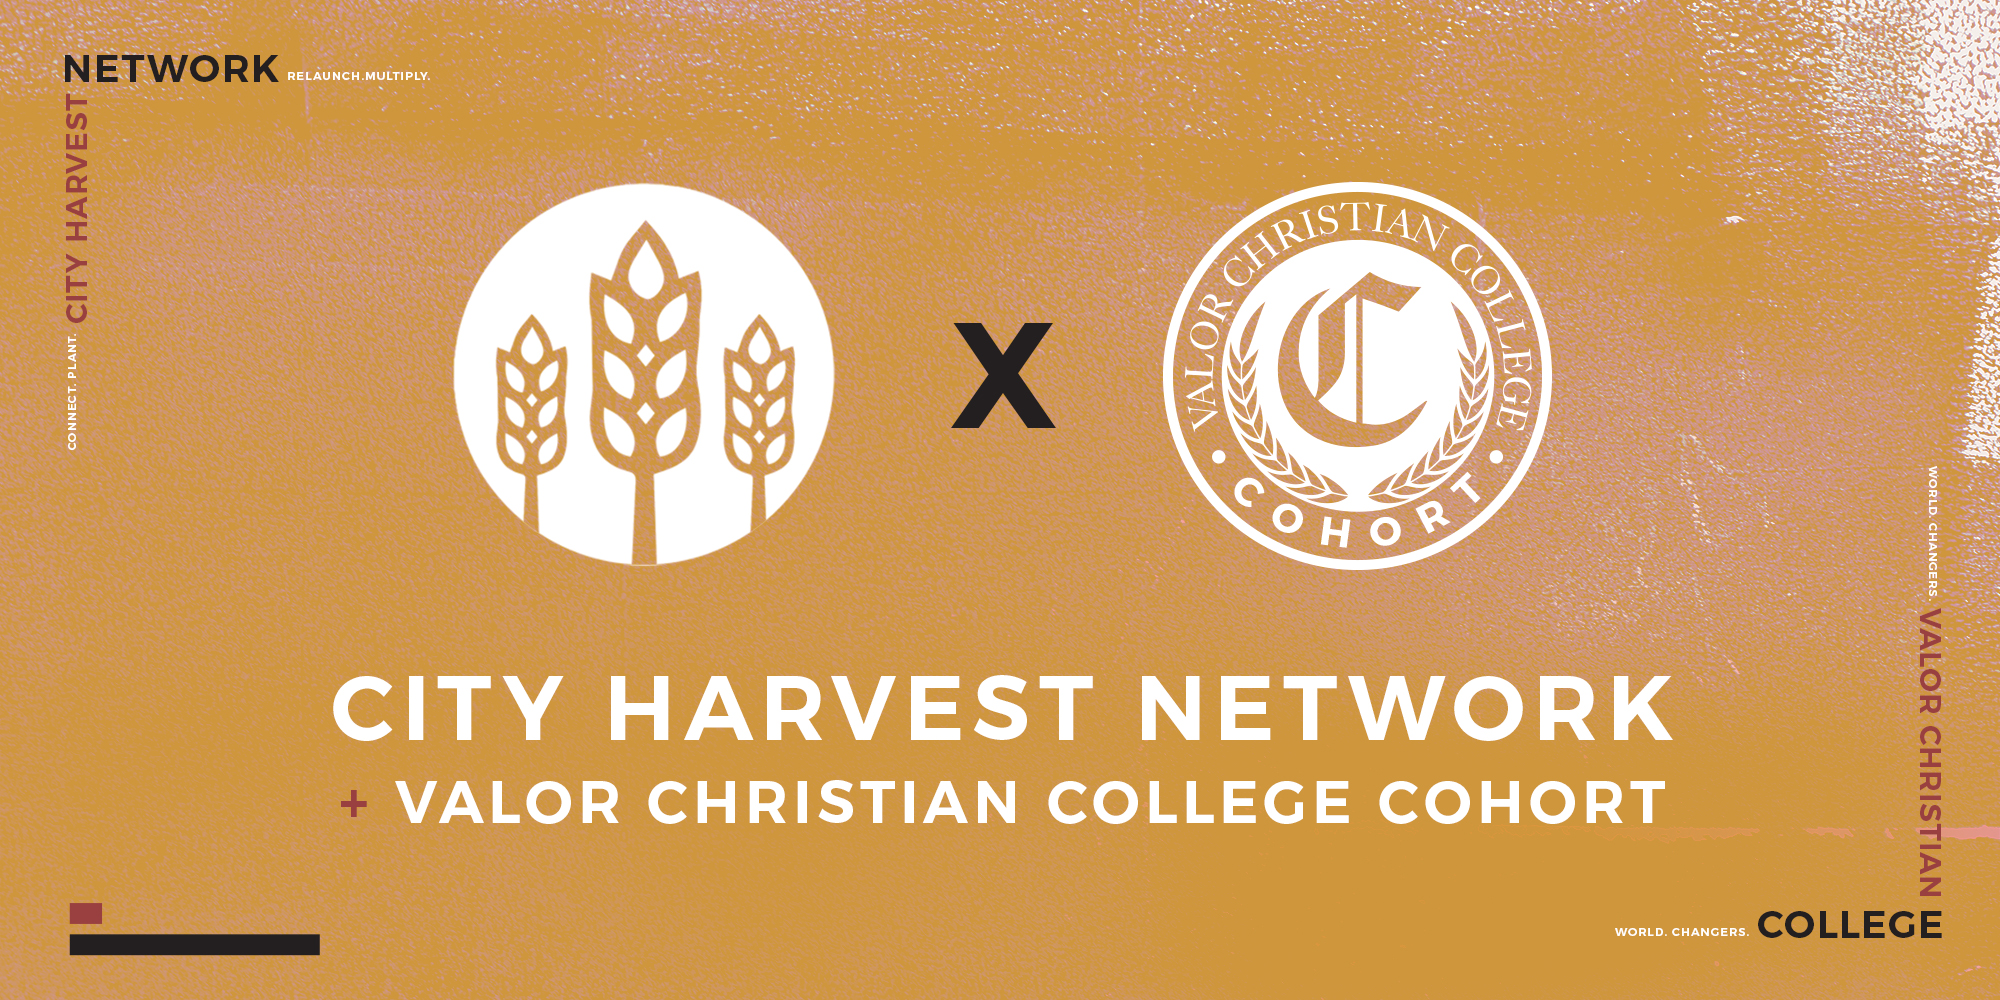 Connect. Plant. Relaunch. Multiply. City Harvest Network + Valor Christian College Cohort